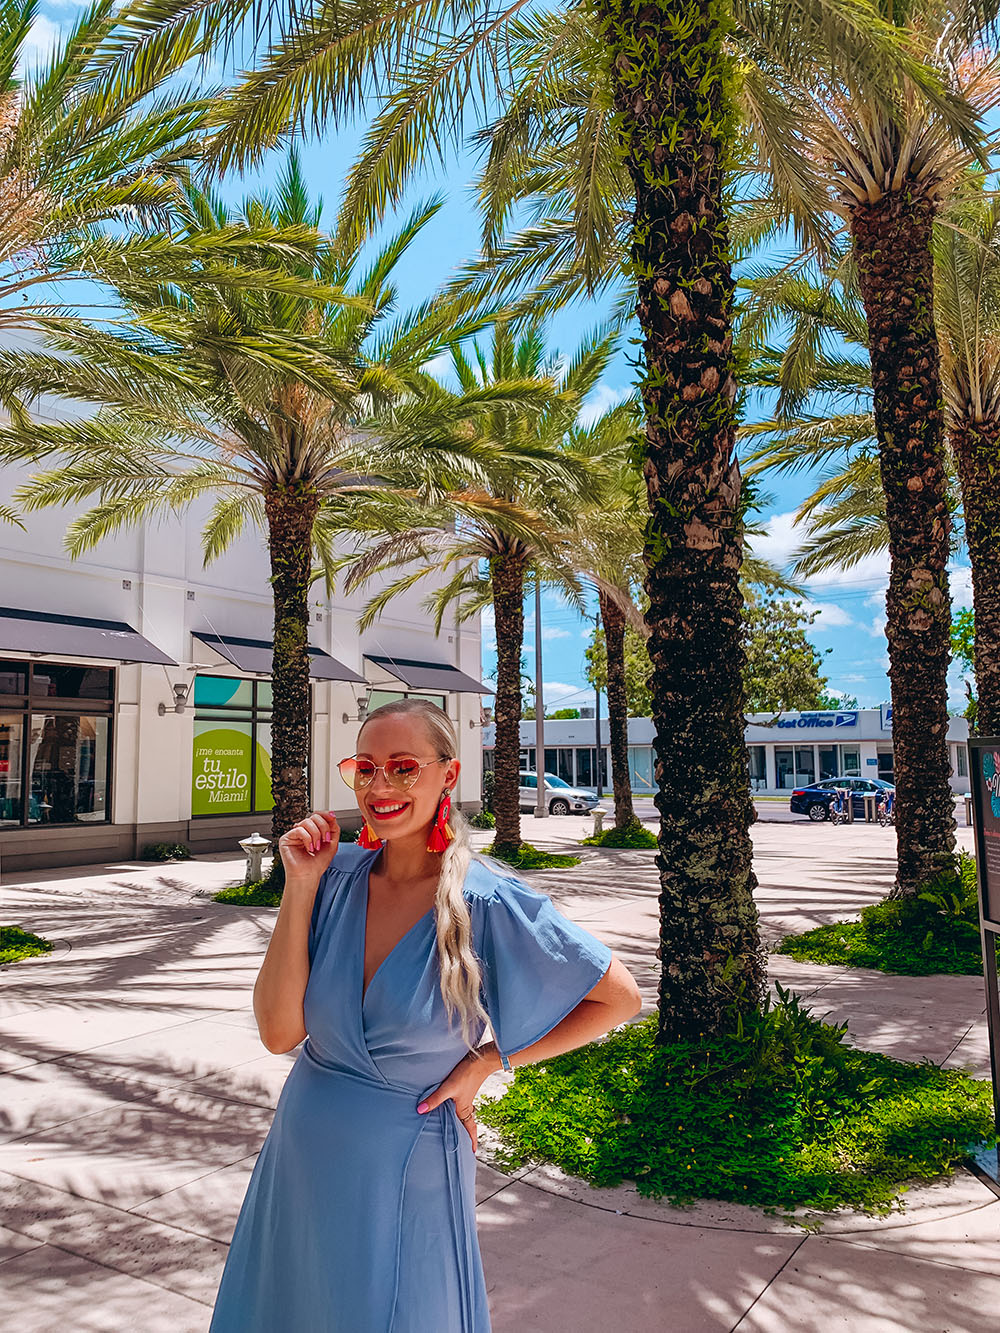 So you've planned a wonderful 3 day trip to Miami and now you're looking for the perfect itinerary for your visit… well, this guide is for you! I’ve put together the ultimate 3 days in Miami itinerary that will have you seeing and experiencing all of Miami’s top sights and attractions. From South Beach & Ocean Drive to Little Havana & Wynwood, you don’t want to miss this guide to the perfect long weekend in Miami. Pictured here: Shopping at the Shops at Midtown Miami